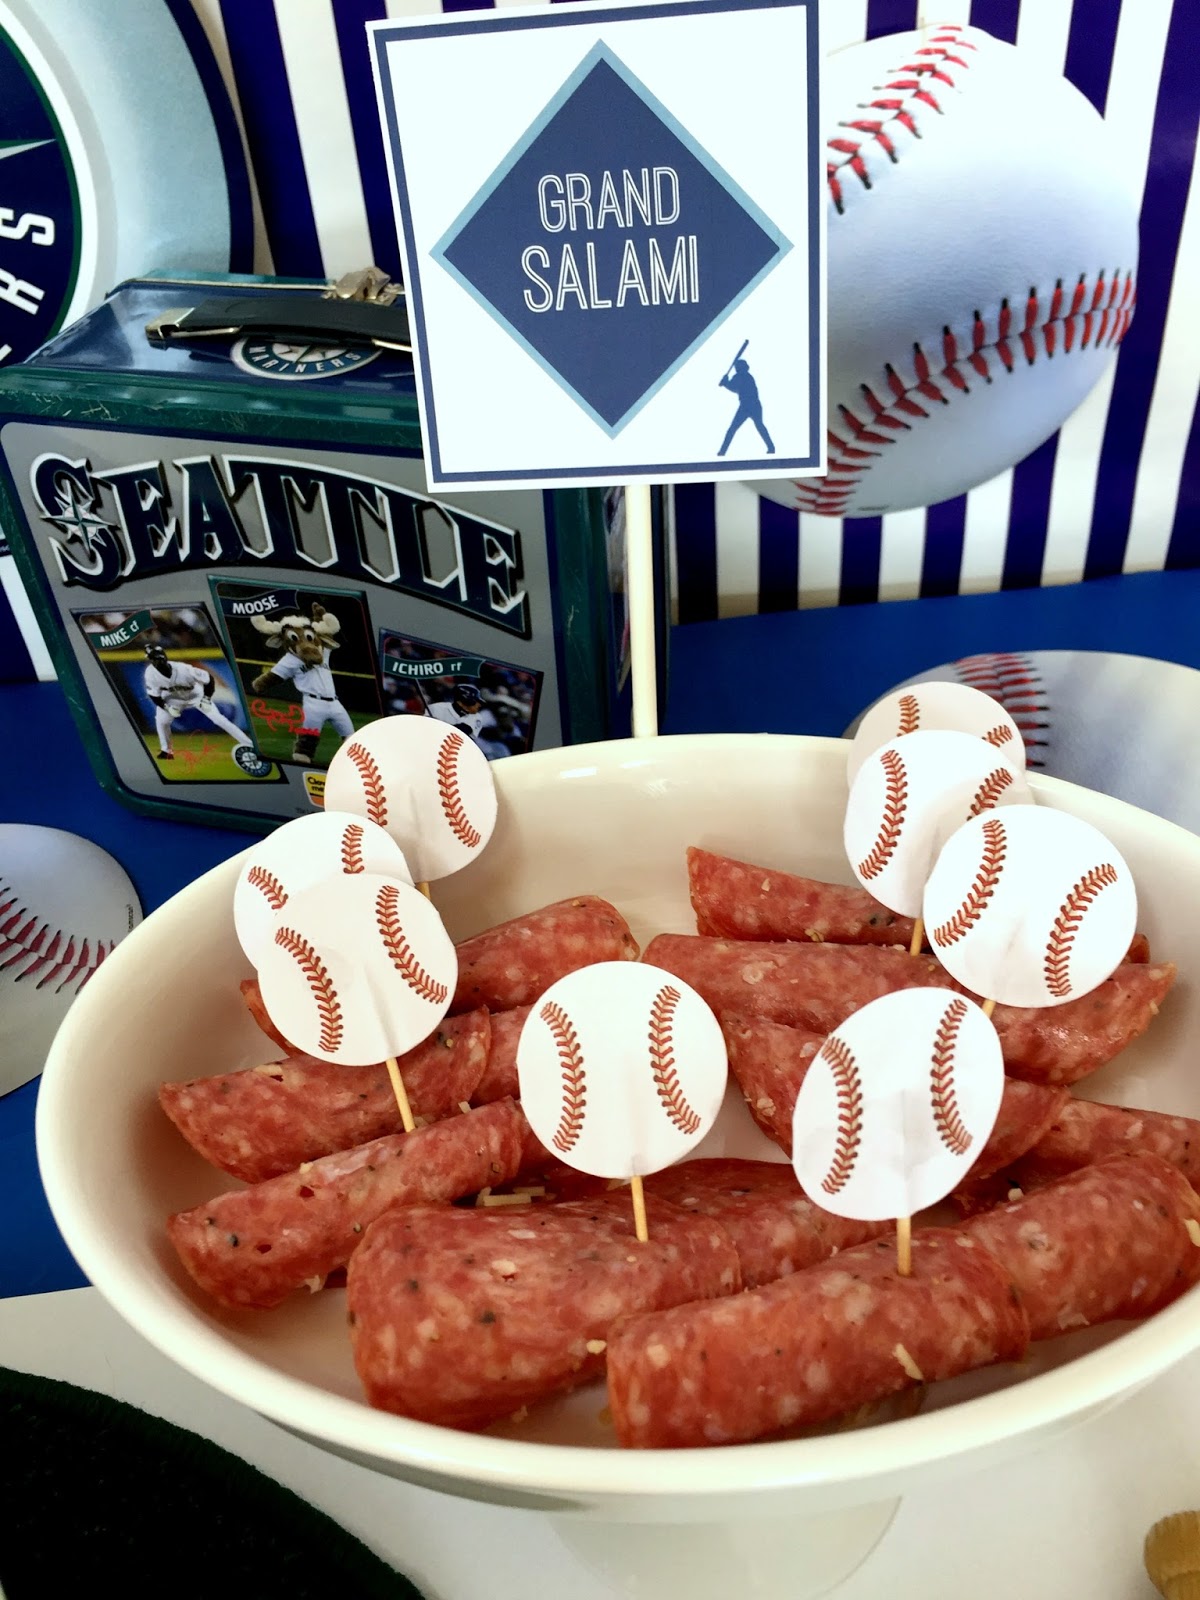 michelle paige blogs: Baseball Party Foods